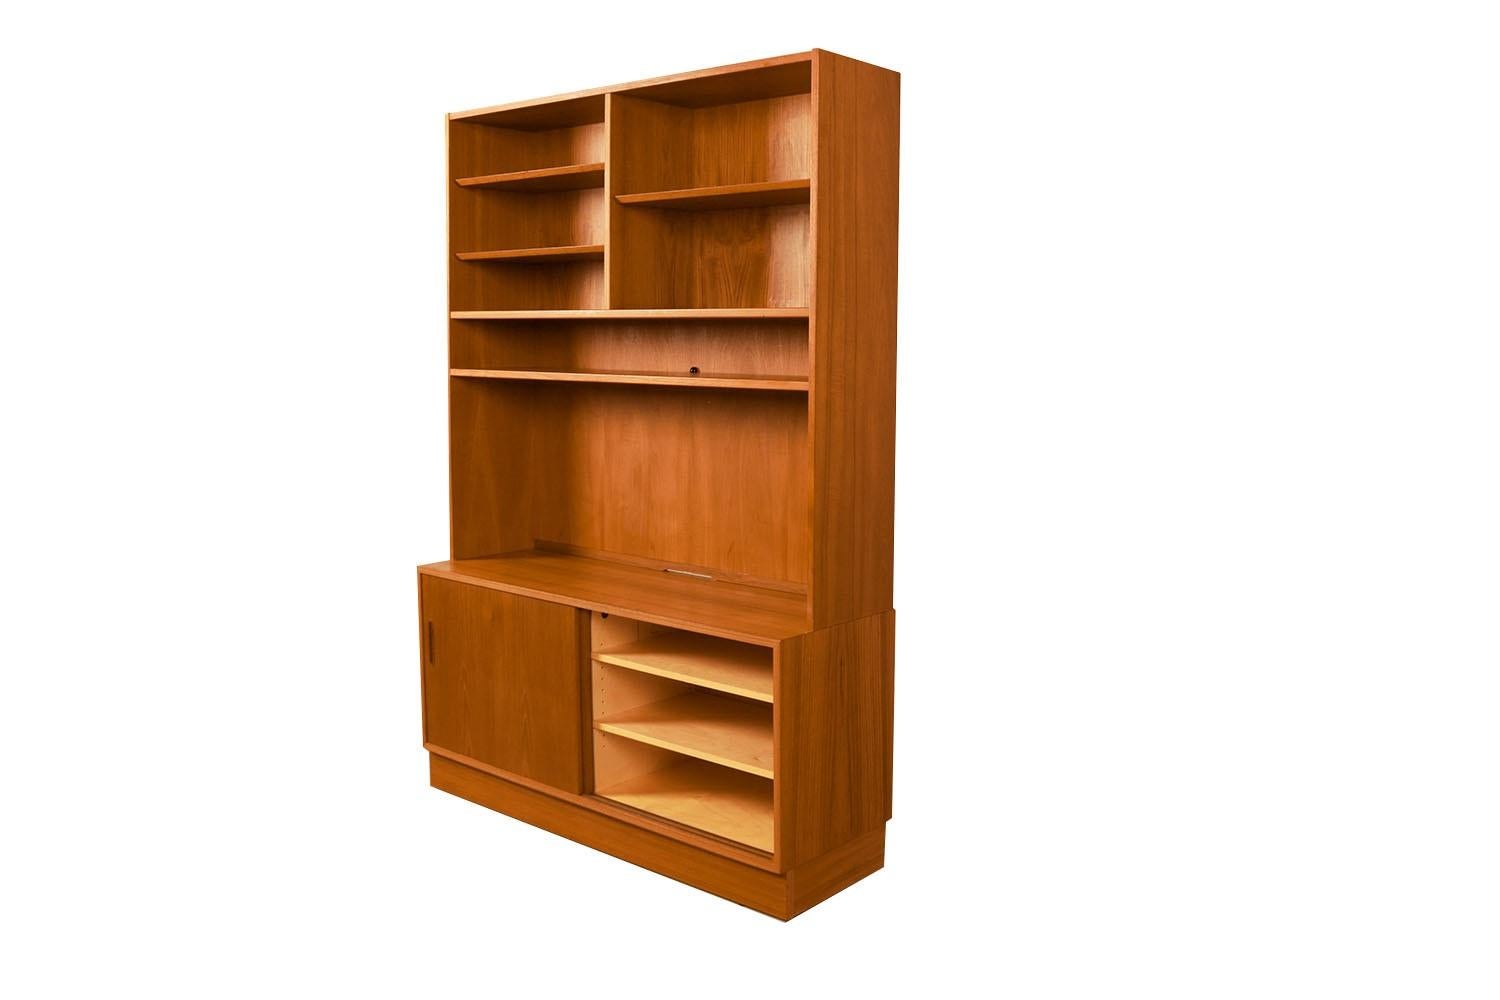 Fantastic Danish teak storage cabinet/ hutch by designer Poul Hundevad. This amazing vintage teak veneer storage cabinet/hutch features a two-piece hutch resting on a credenza base made in Denmark by designer Poul Hundevad. A beautiful Danish Modern